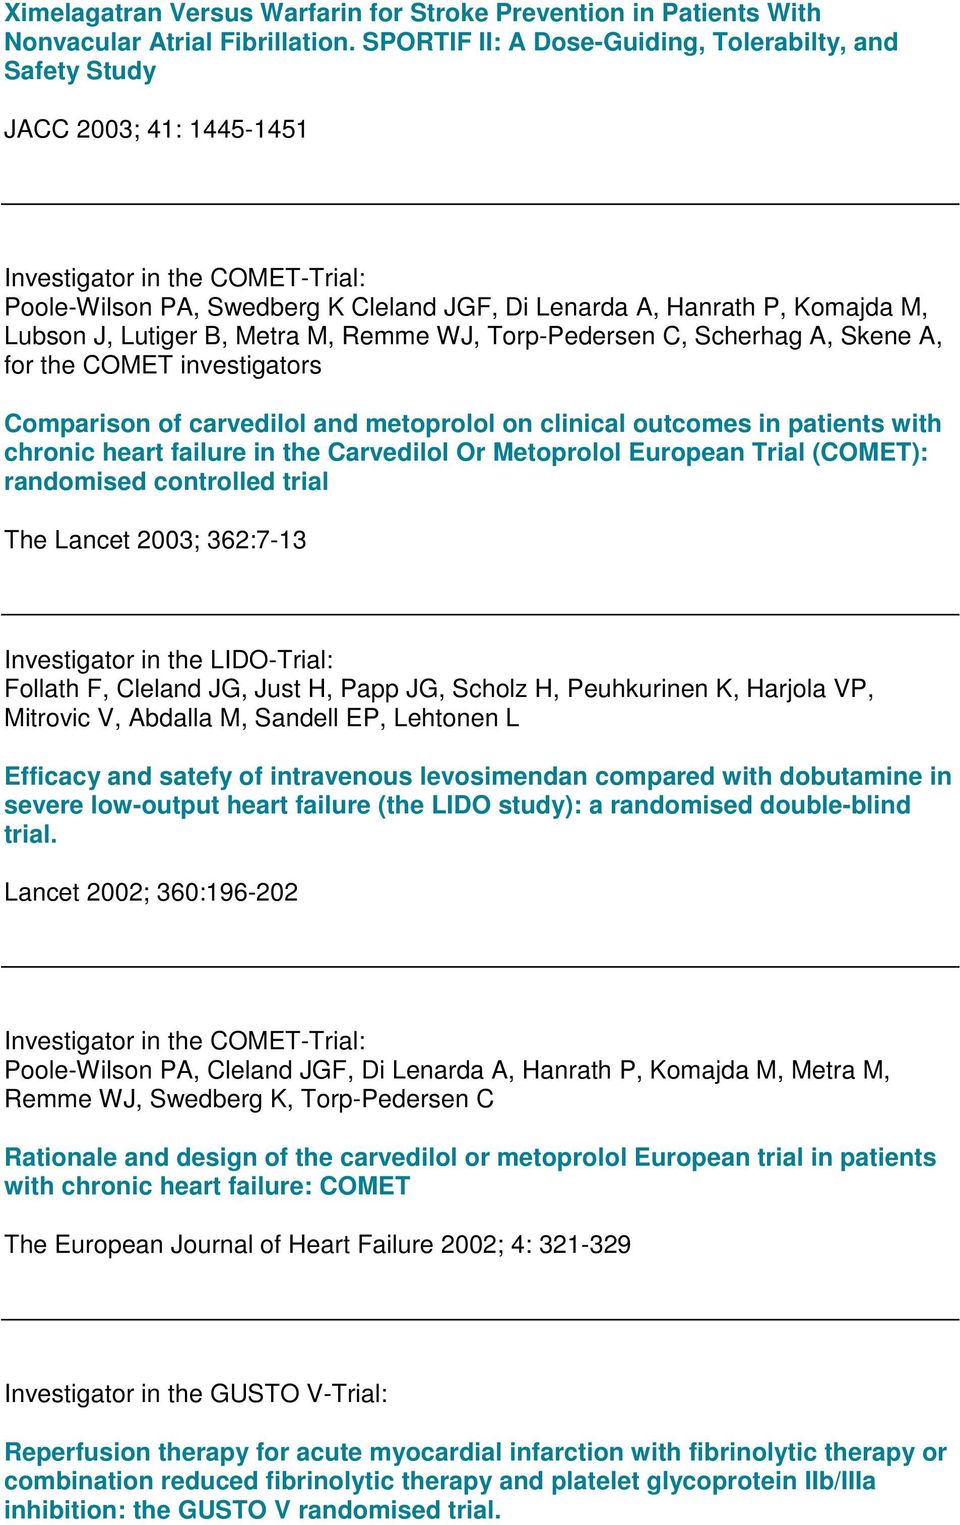 J, Lutiger B, Metra M, Remme WJ, Torp-Pedersen C, Scherhag A, Skene A, for the COMET investigators Comparison of carvedilol and metoprolol on clinical outcomes in patients with chronic heart failure